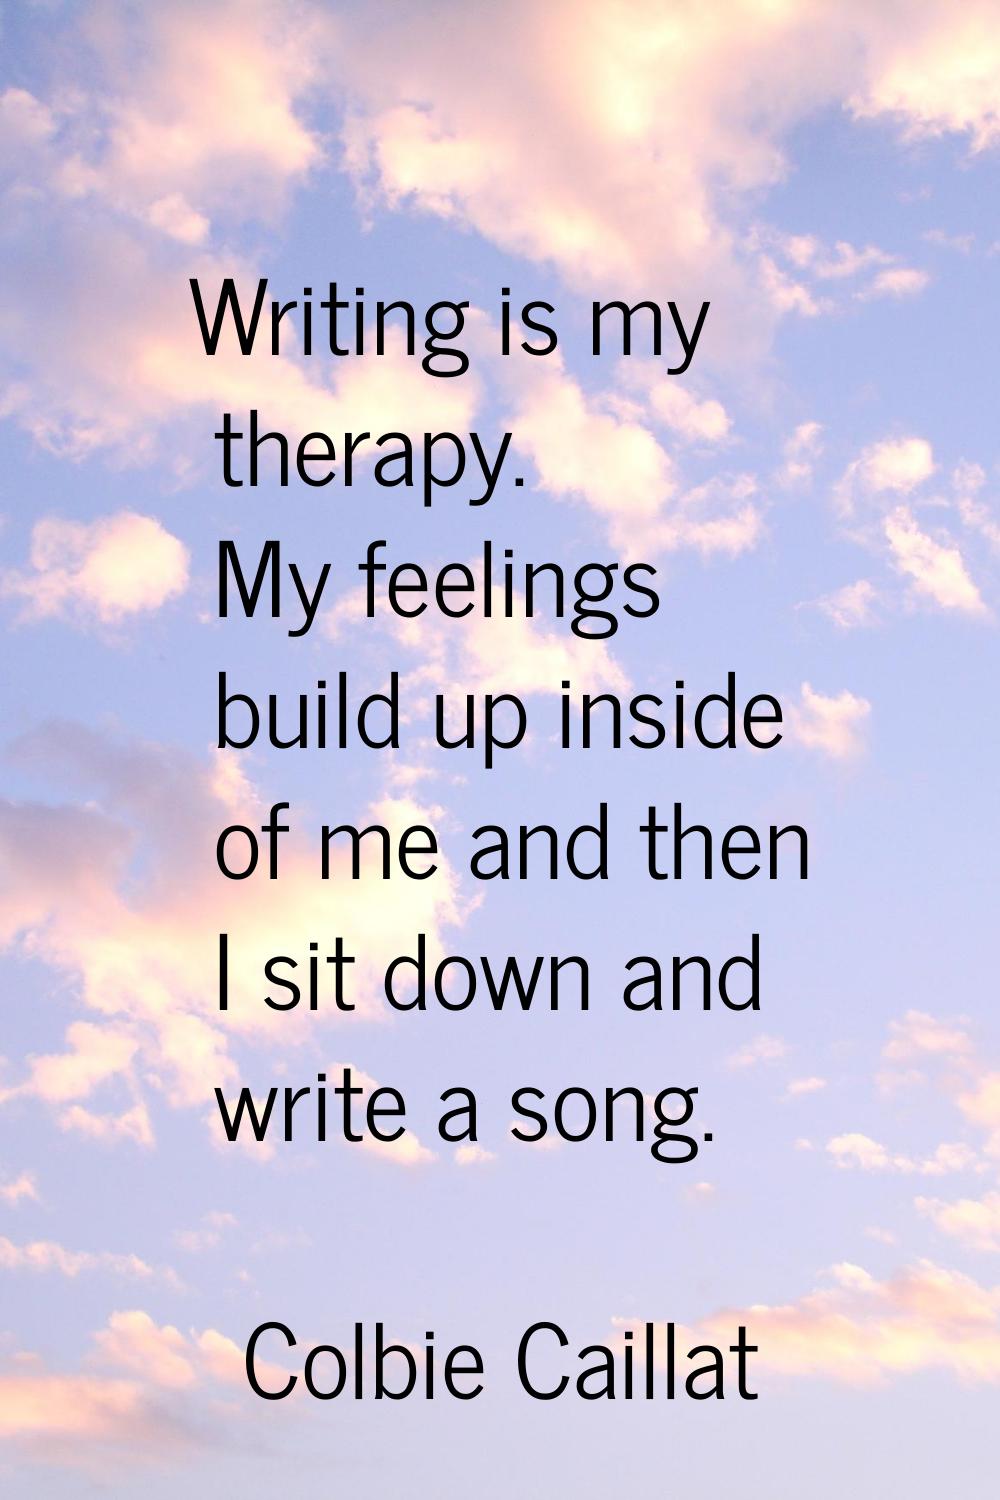 Writing is my therapy. My feelings build up inside of me and then I sit down and write a song.